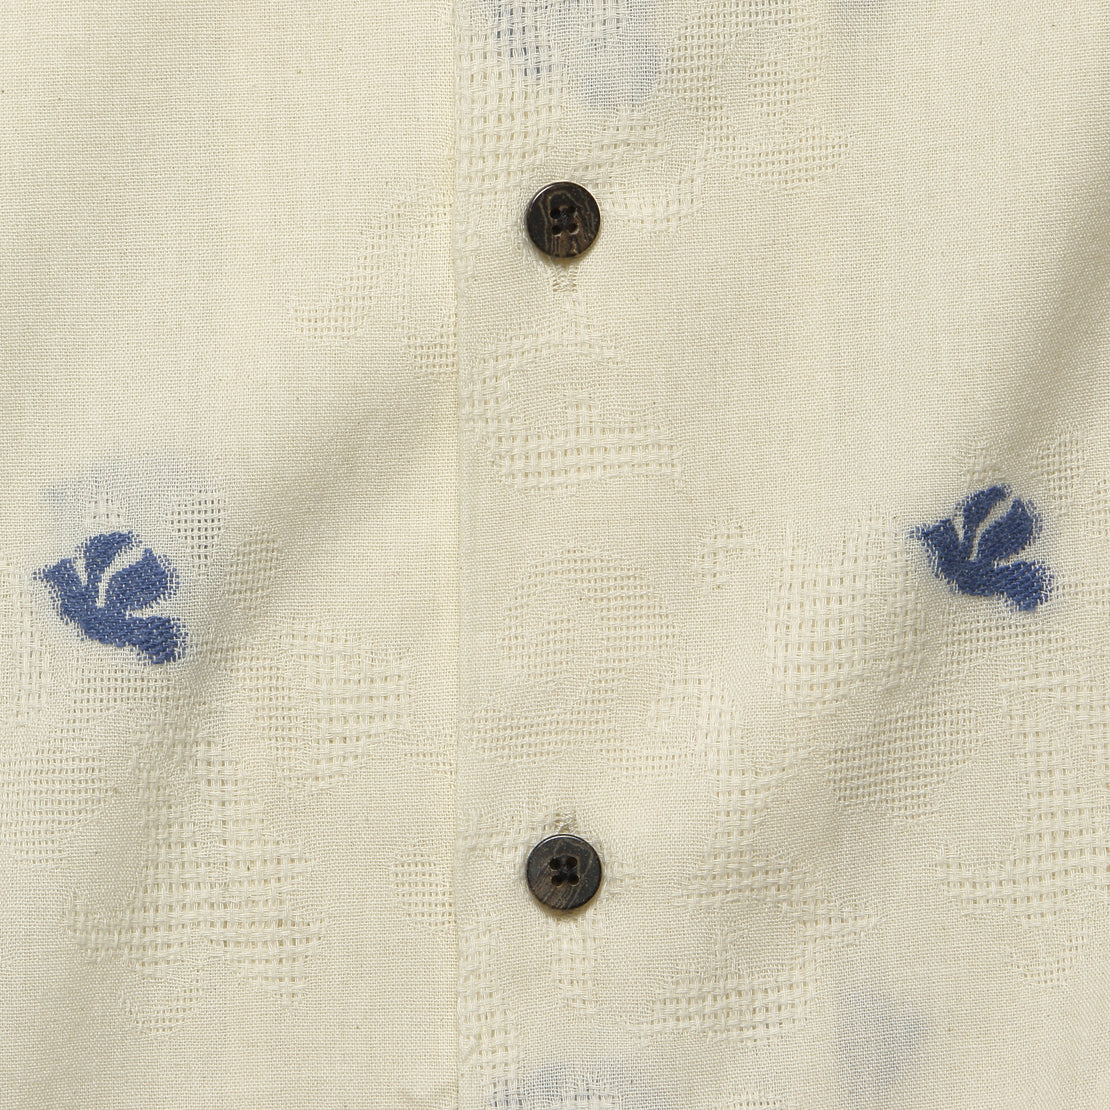 Philly Shirt - White/Blue - Portuguese Flannel - STAG Provisions - Tops - S/S Woven - Other Pattern